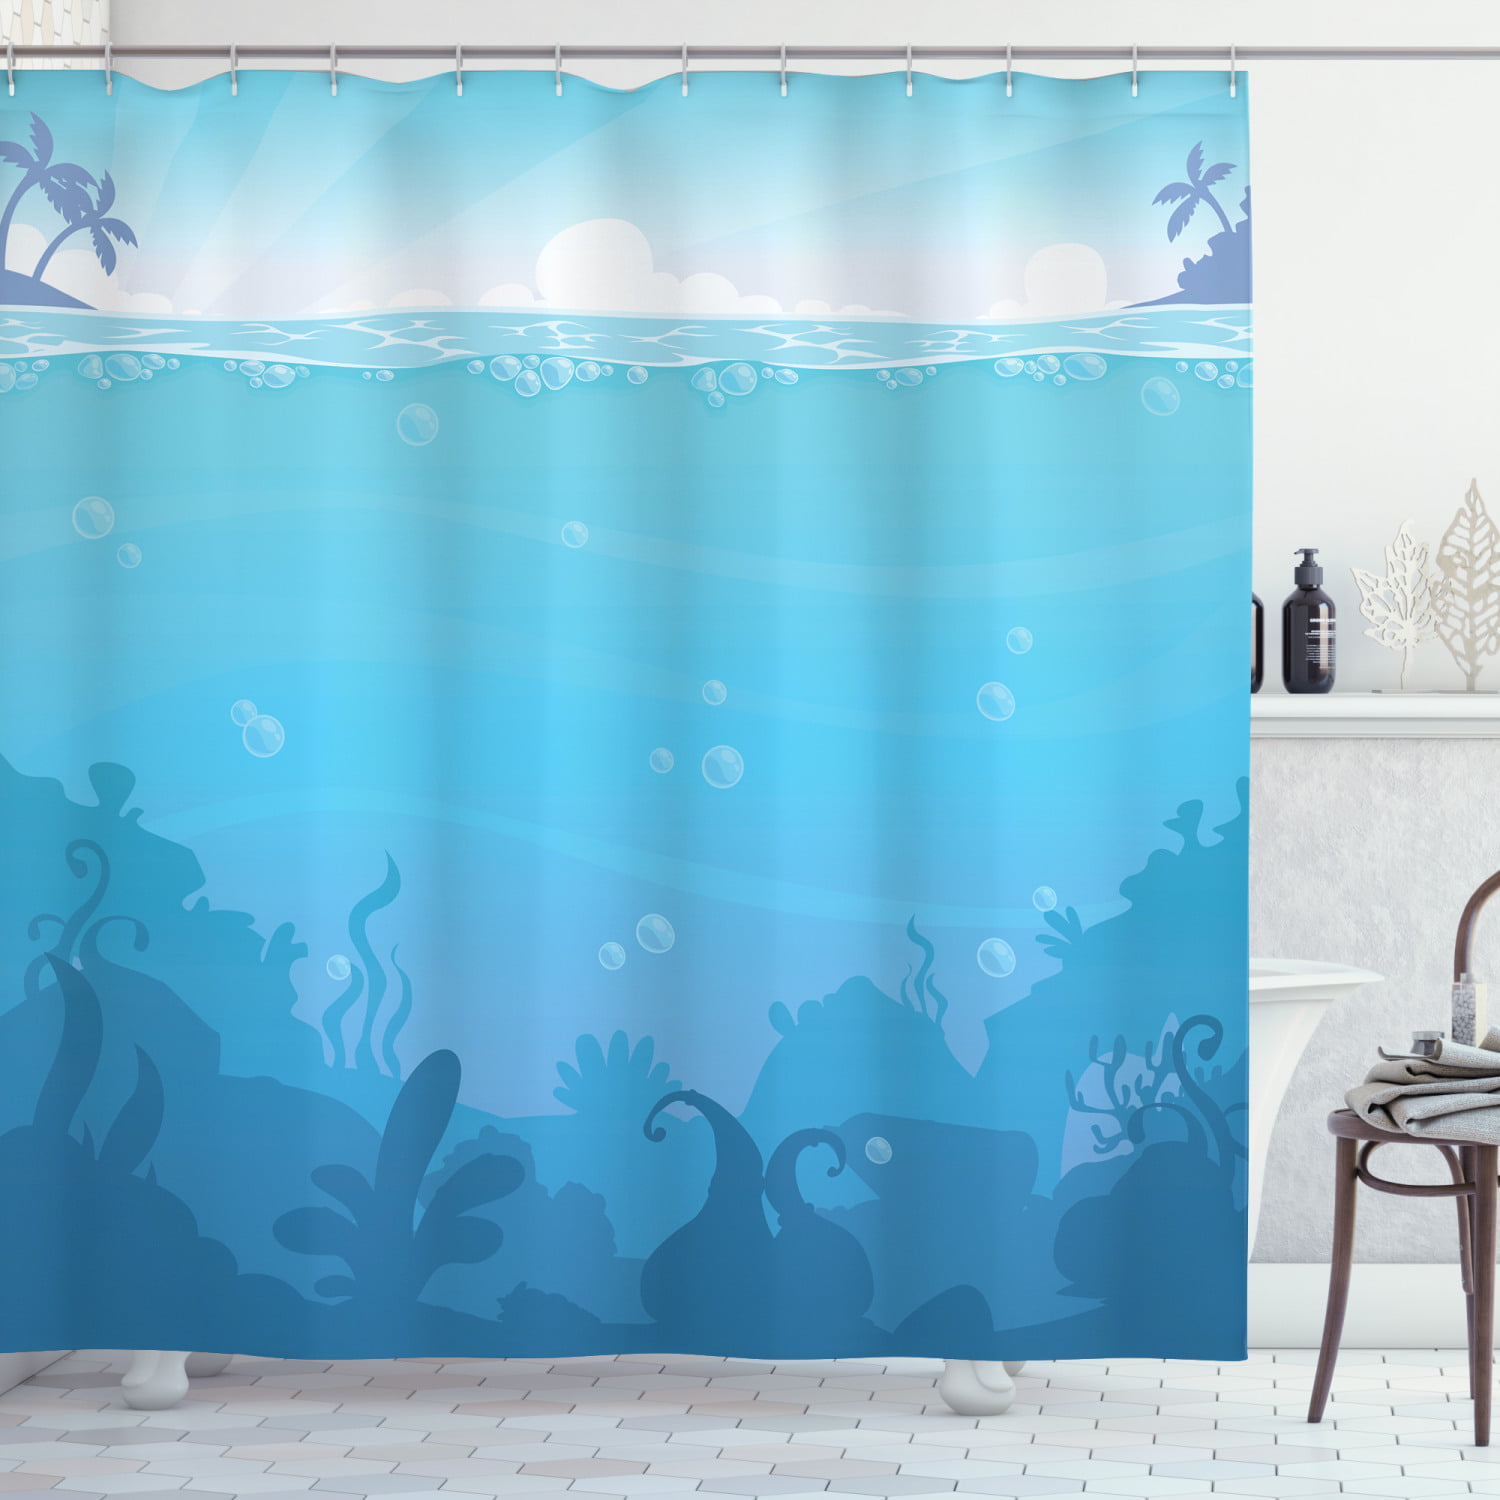 Ambesonne Printed Shower Curtain in 3 Sizes Waterproof Fabric Set with Hooks 